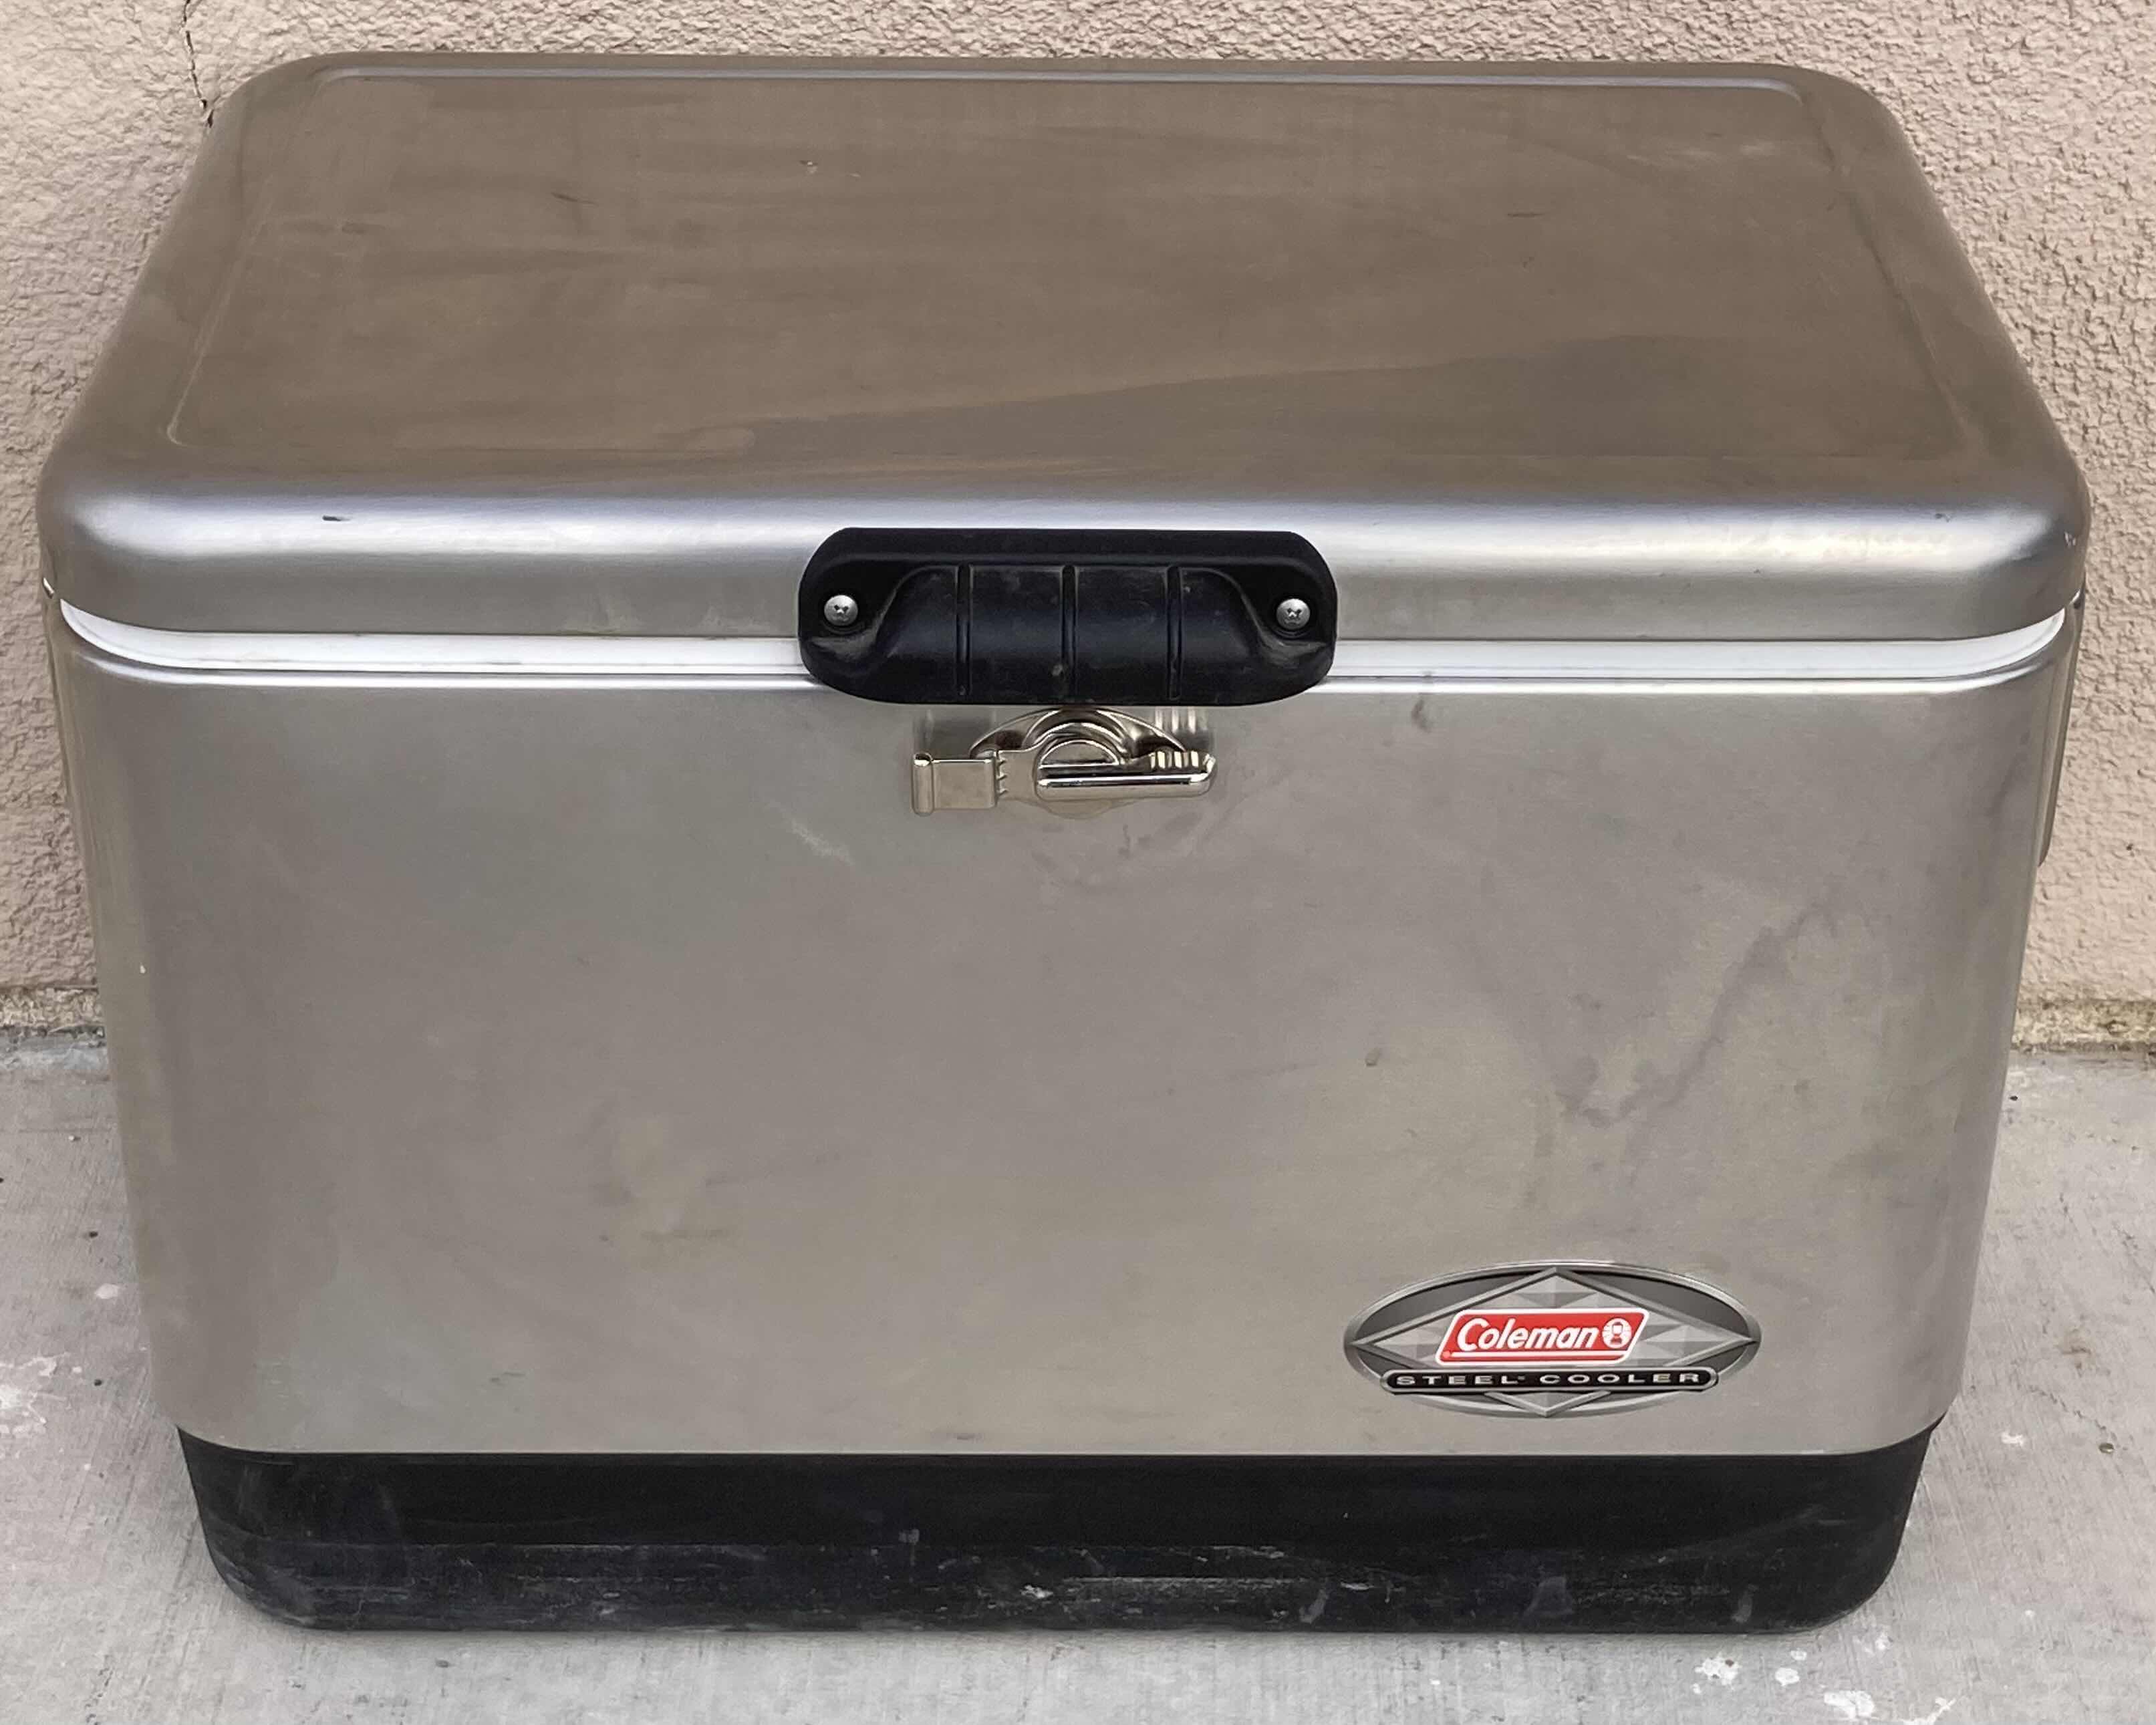 Photo 2 of COLEMAN STEEL COOLER ICE CHEST MODEL 6150 6155 24” X 16” H16”